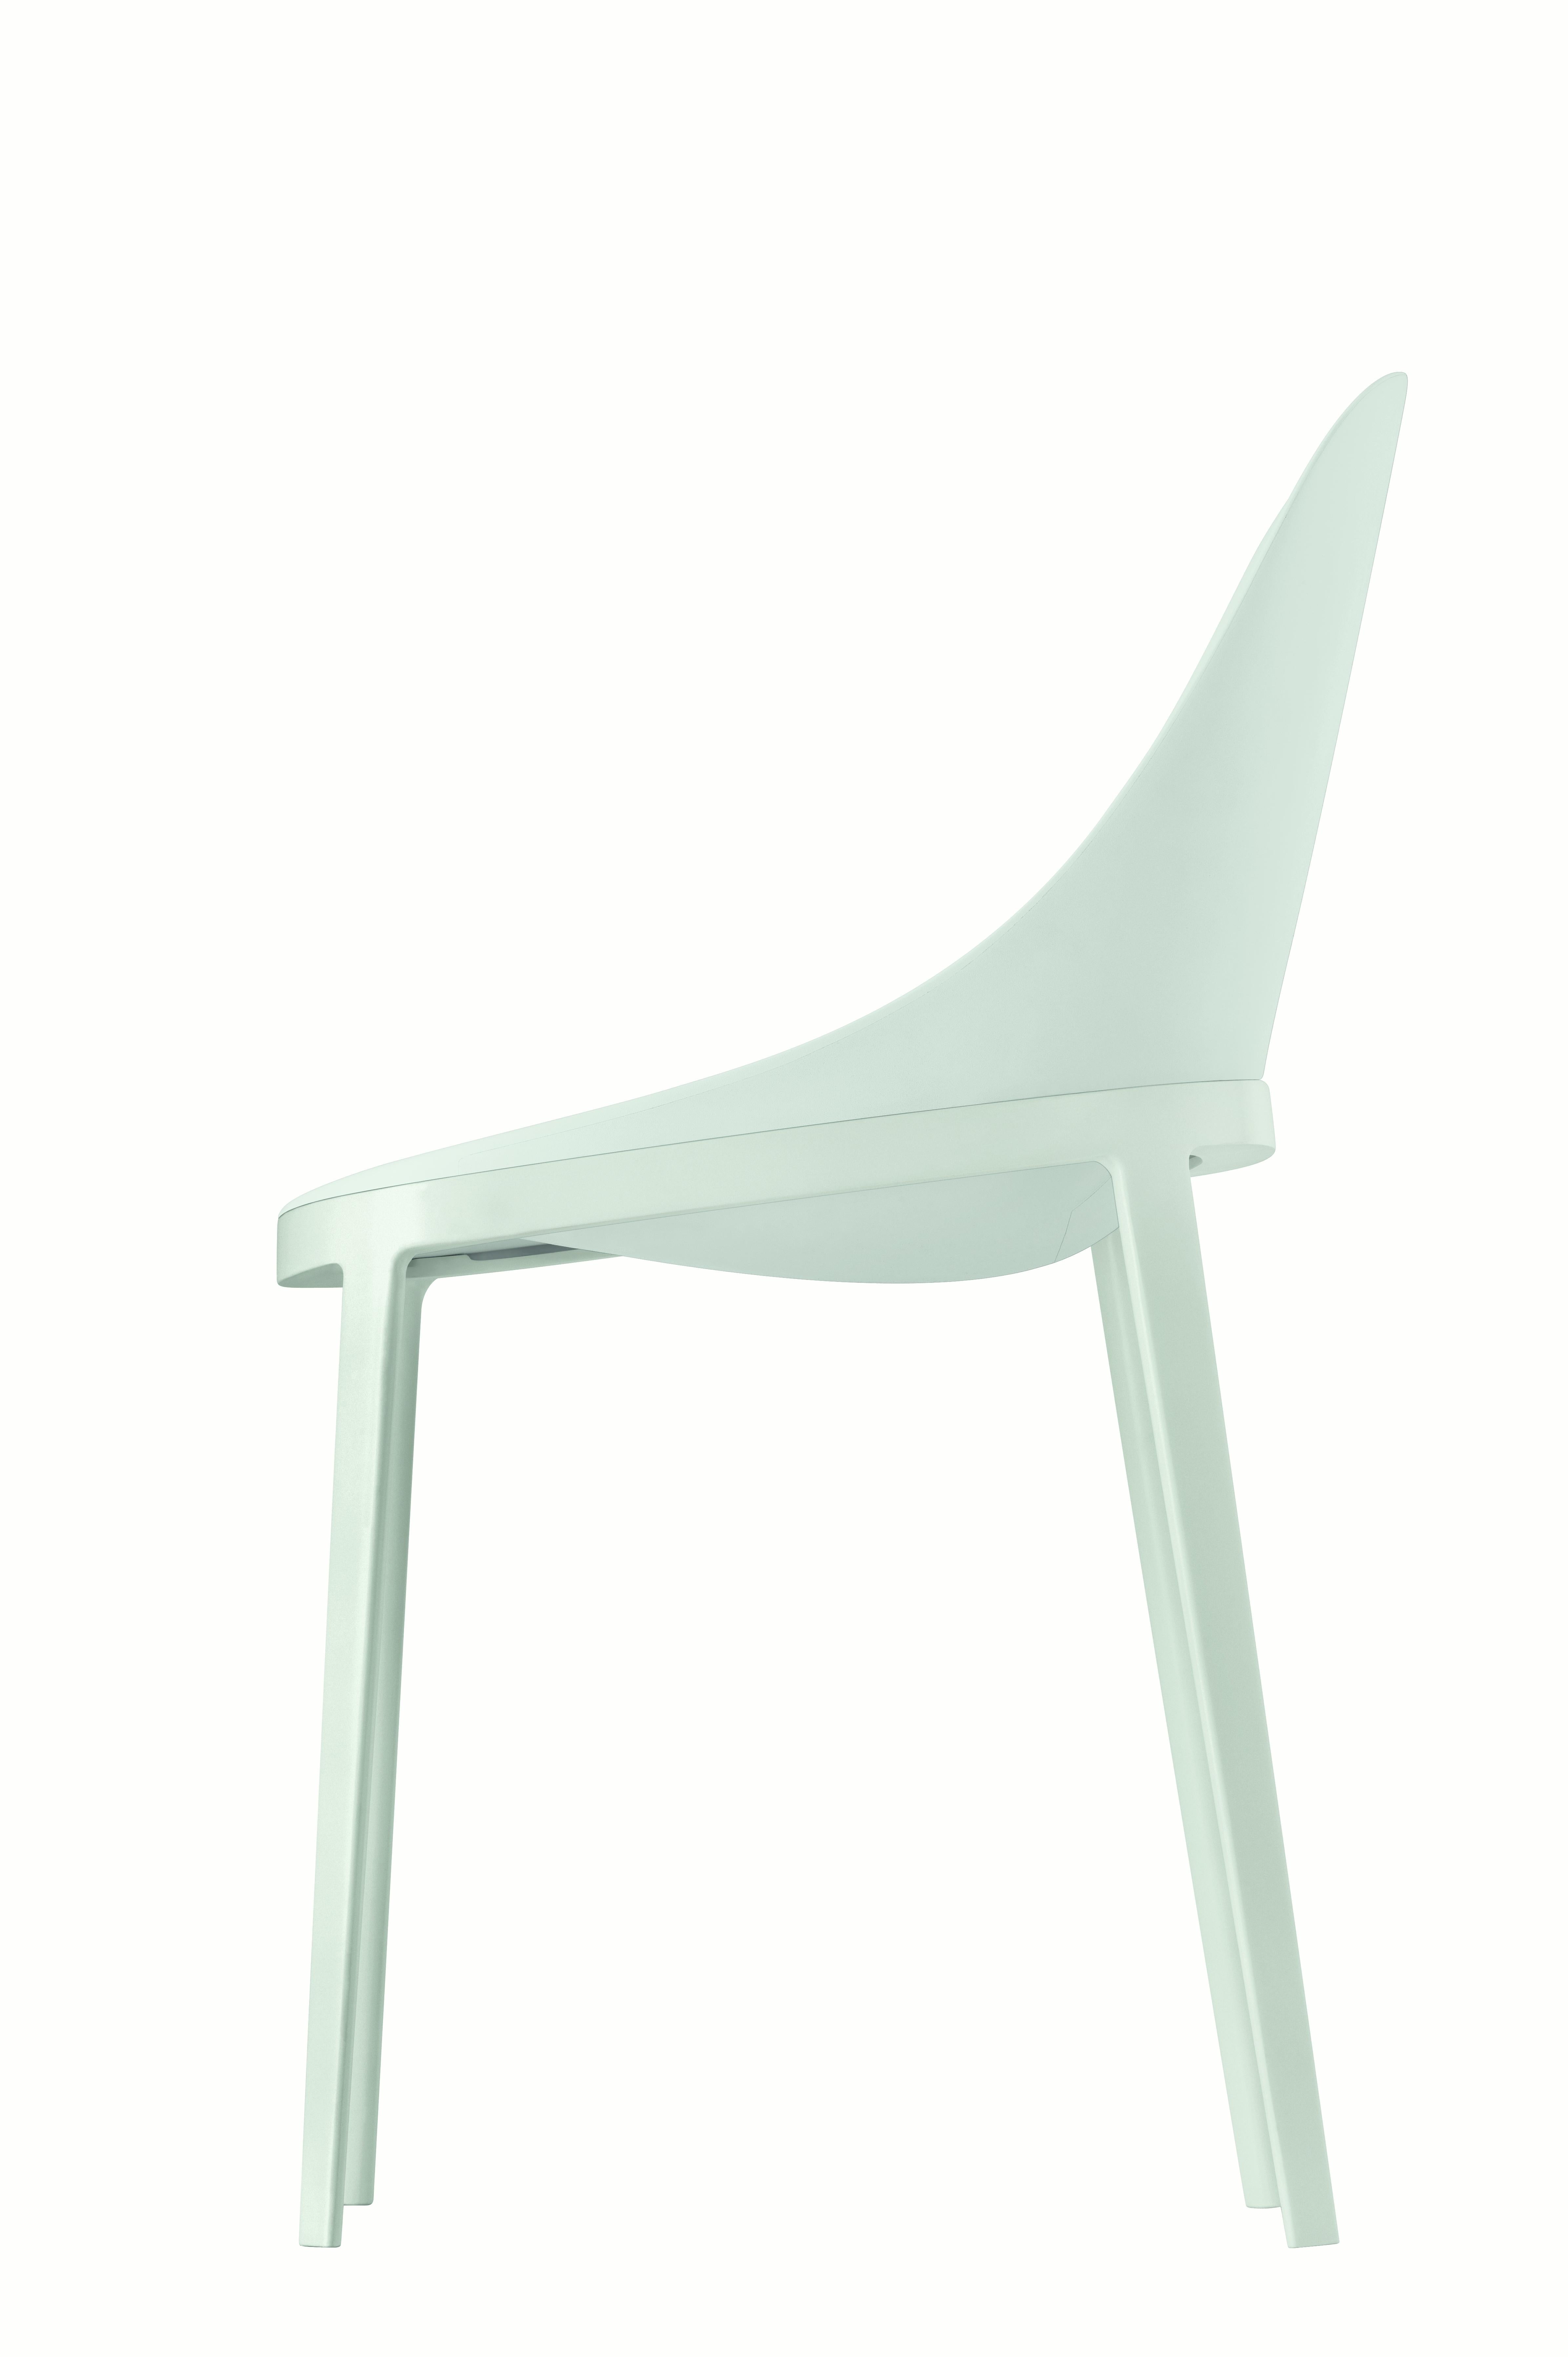 Italian Alias 070 Elle Chair in White with Lacquered Aluminum Frame by Eugeni Quitllet For Sale